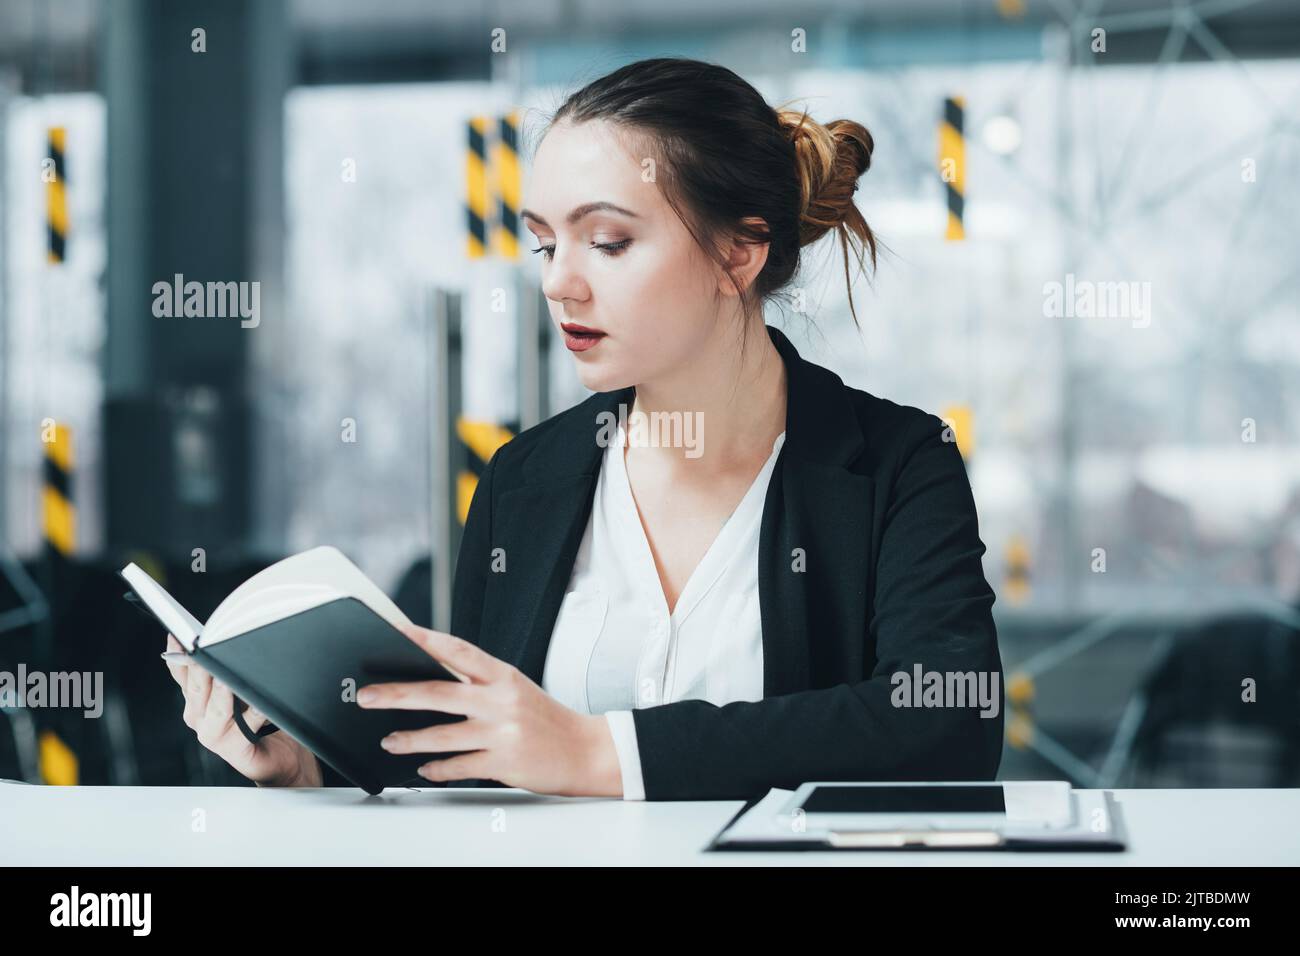 woman work corporate workplace business executive Stock Photo